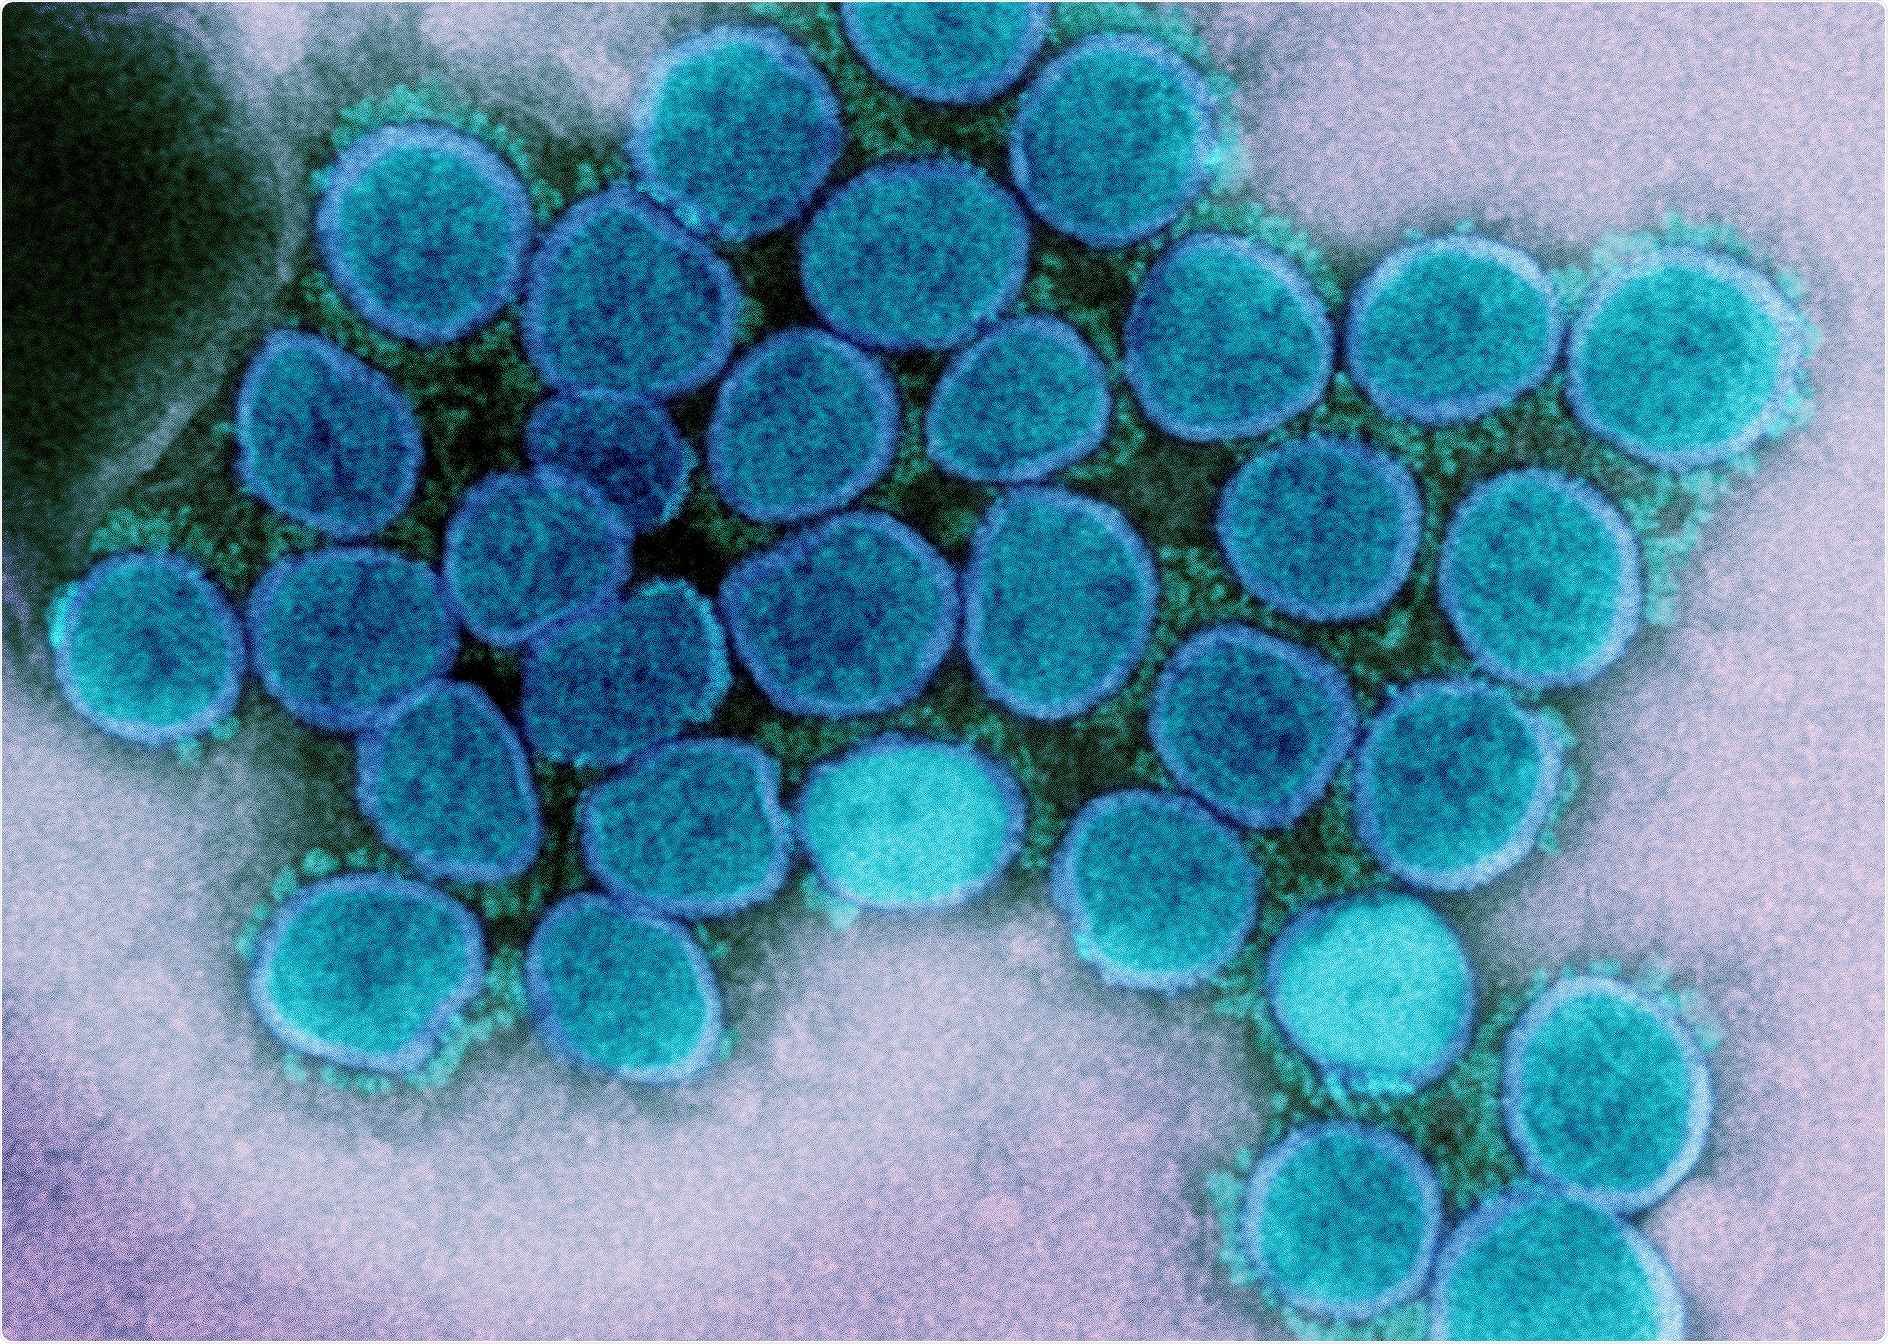 Study: Rapid assessment of SARS-CoV-2 evolved variants using virus-like particles. Image Credit: NIAID